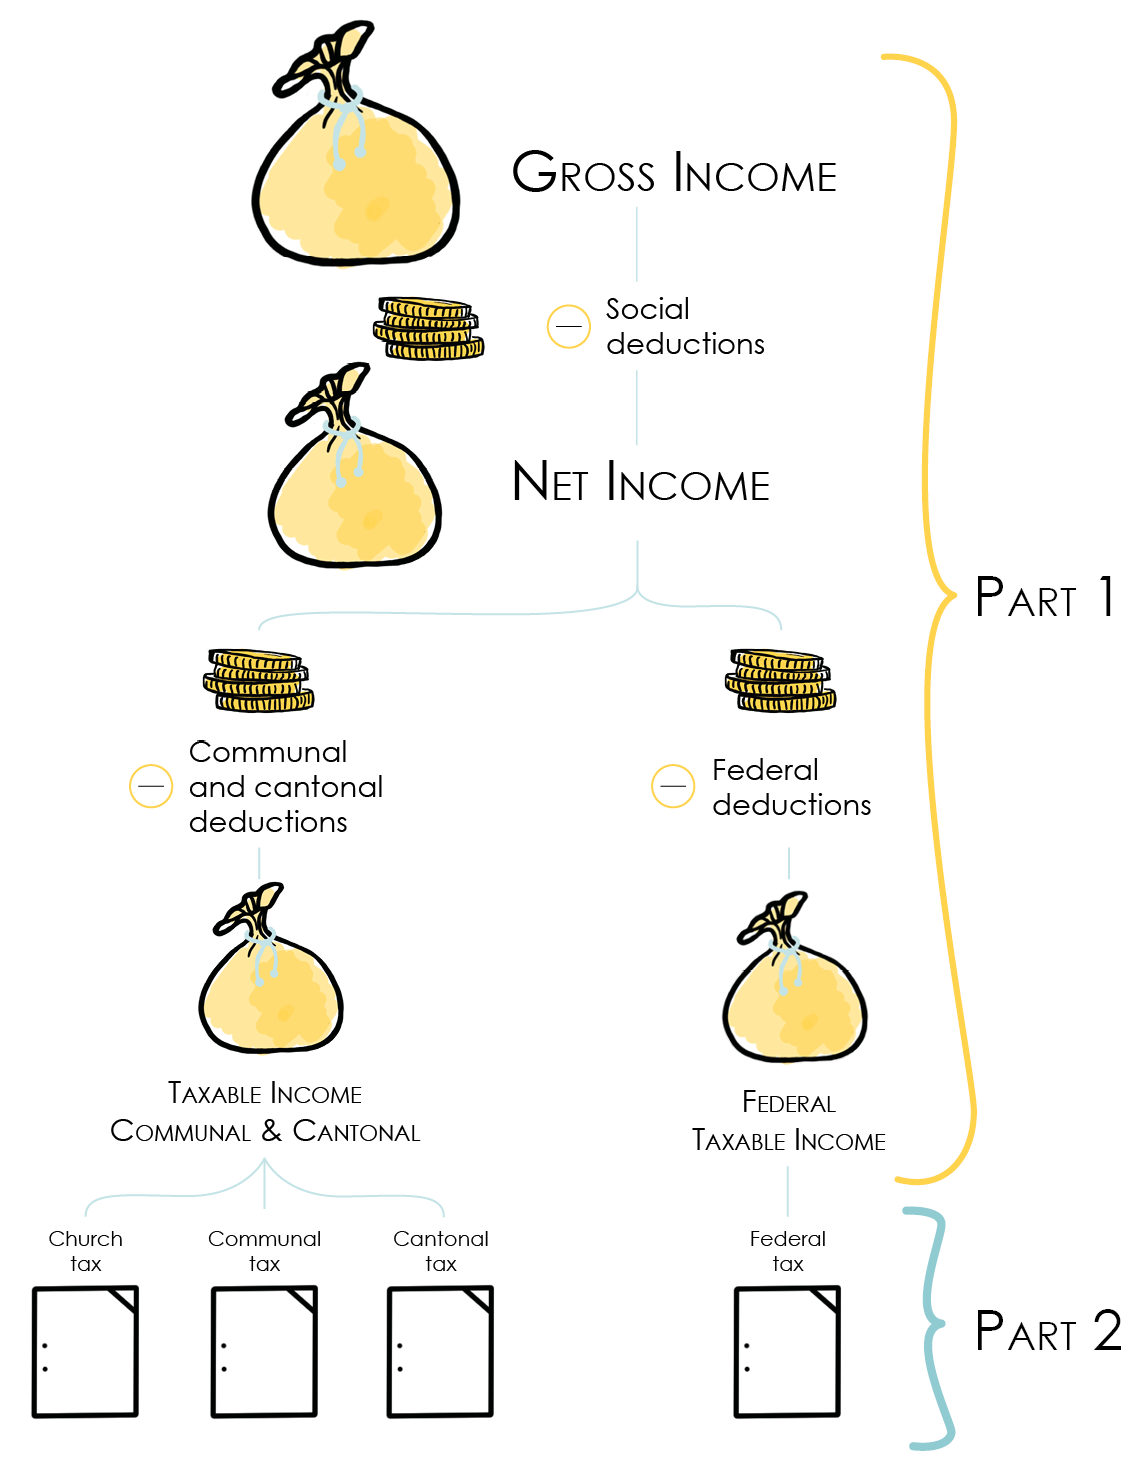 Figure showing how tax is calculated based on gross income